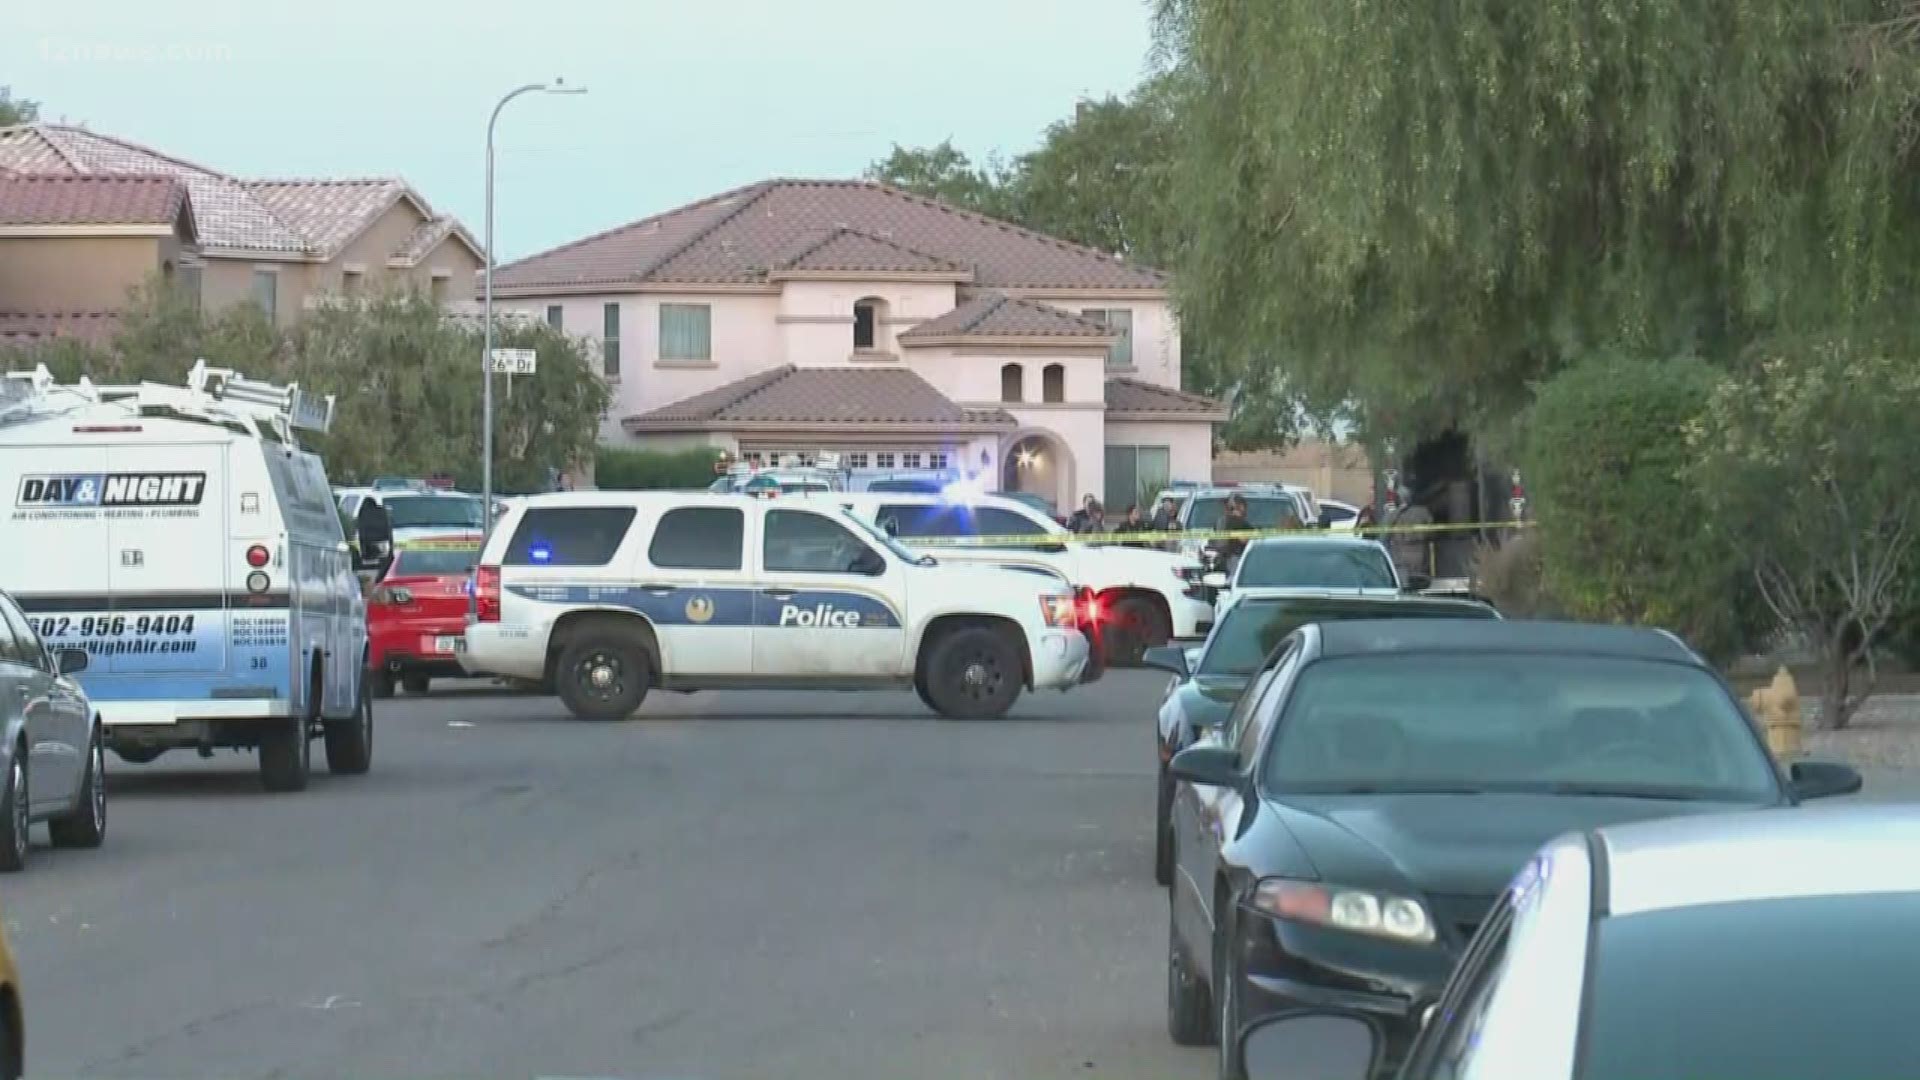 A man was found with a gunshot wound after officers responded to a domestic violence call in Phoenix early Thursday morning, according to Phoenix PD